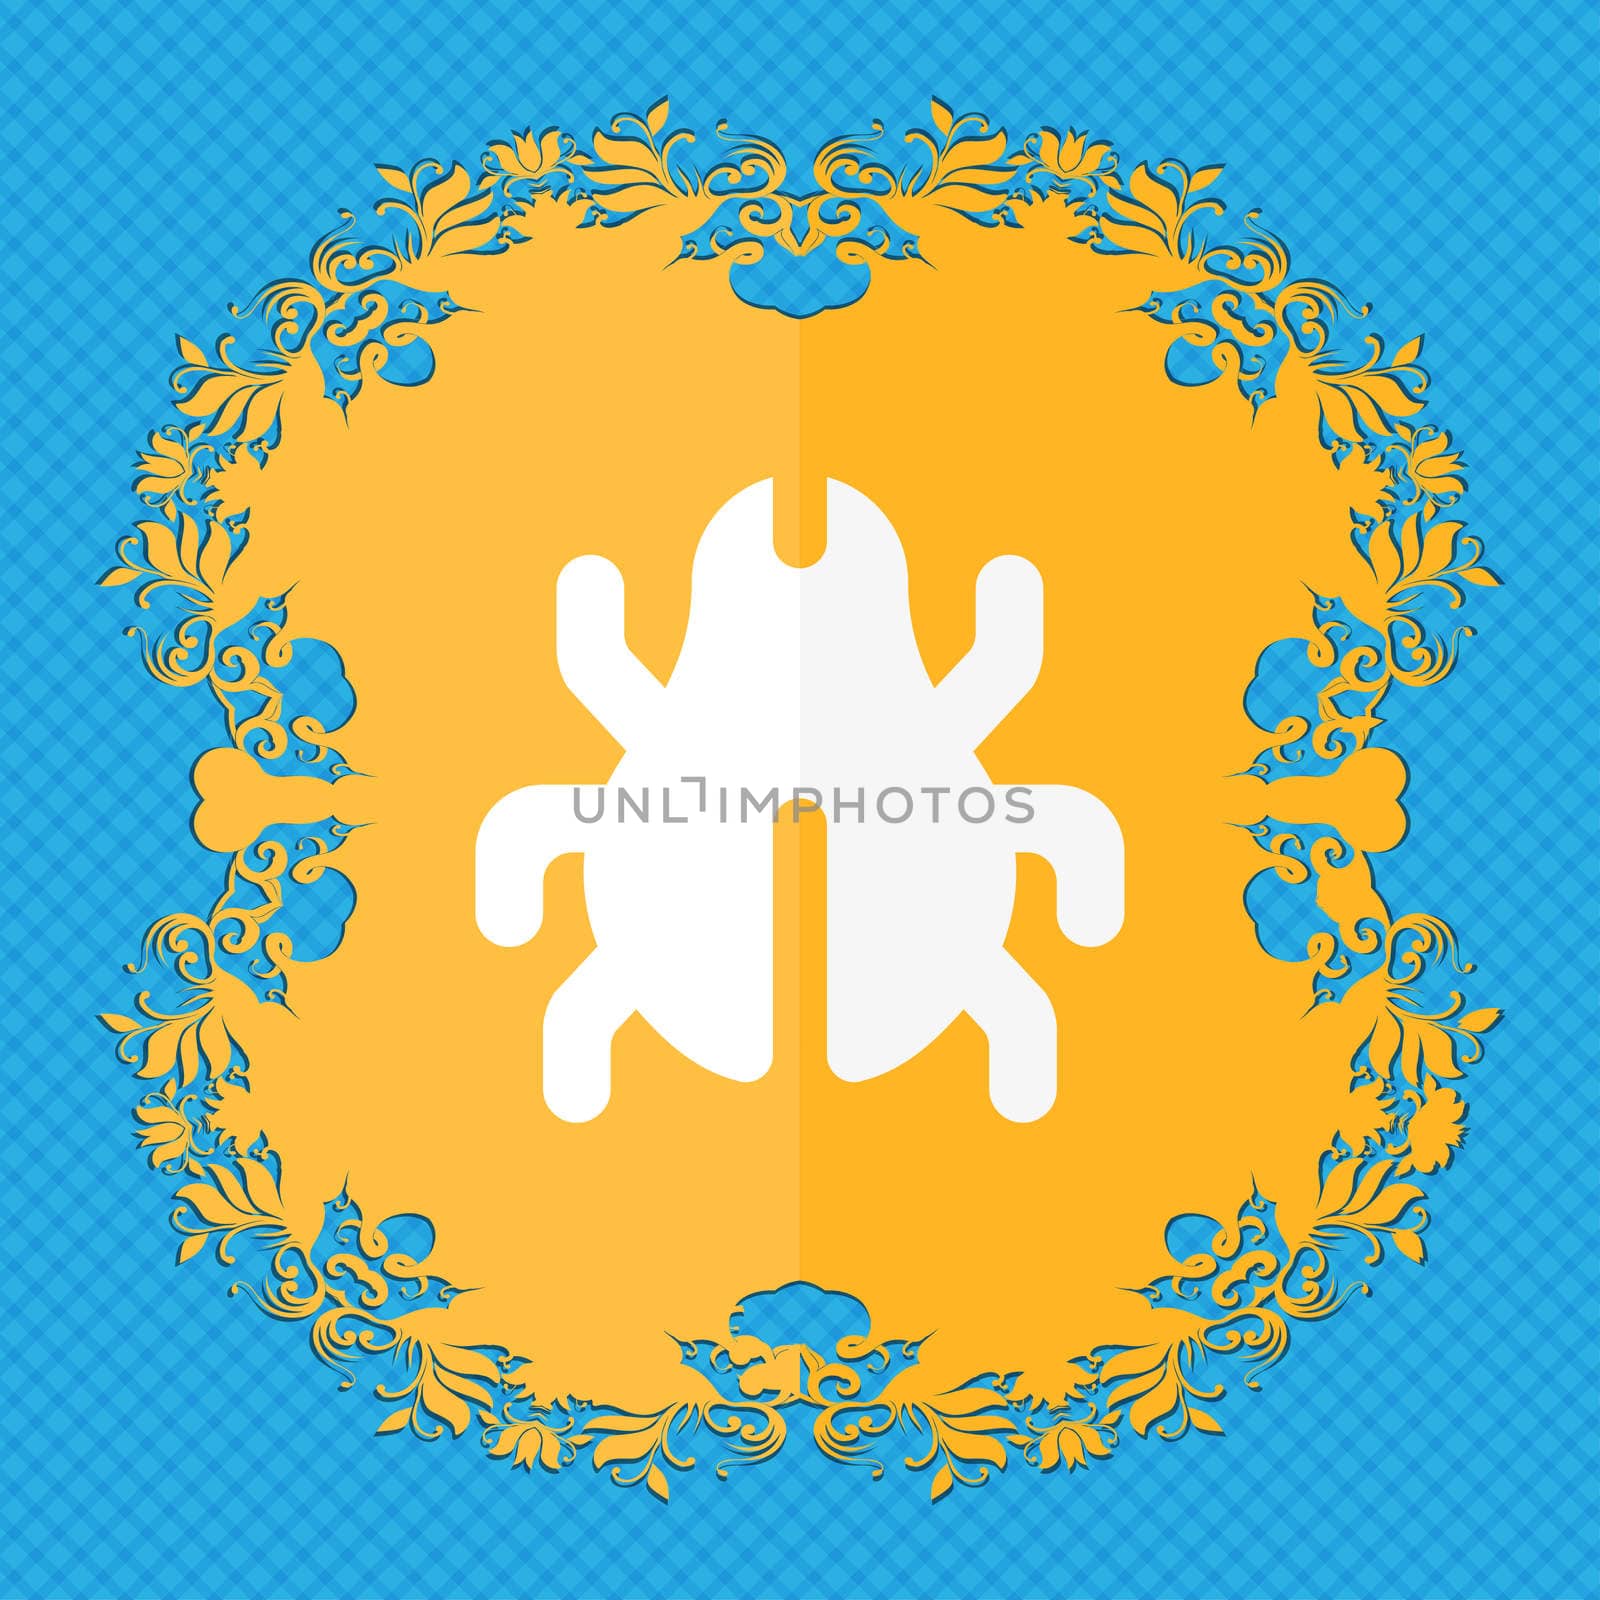 Software Bug, Virus, Disinfection, beetle . Floral flat design on a blue abstract background with place for your text. illustration